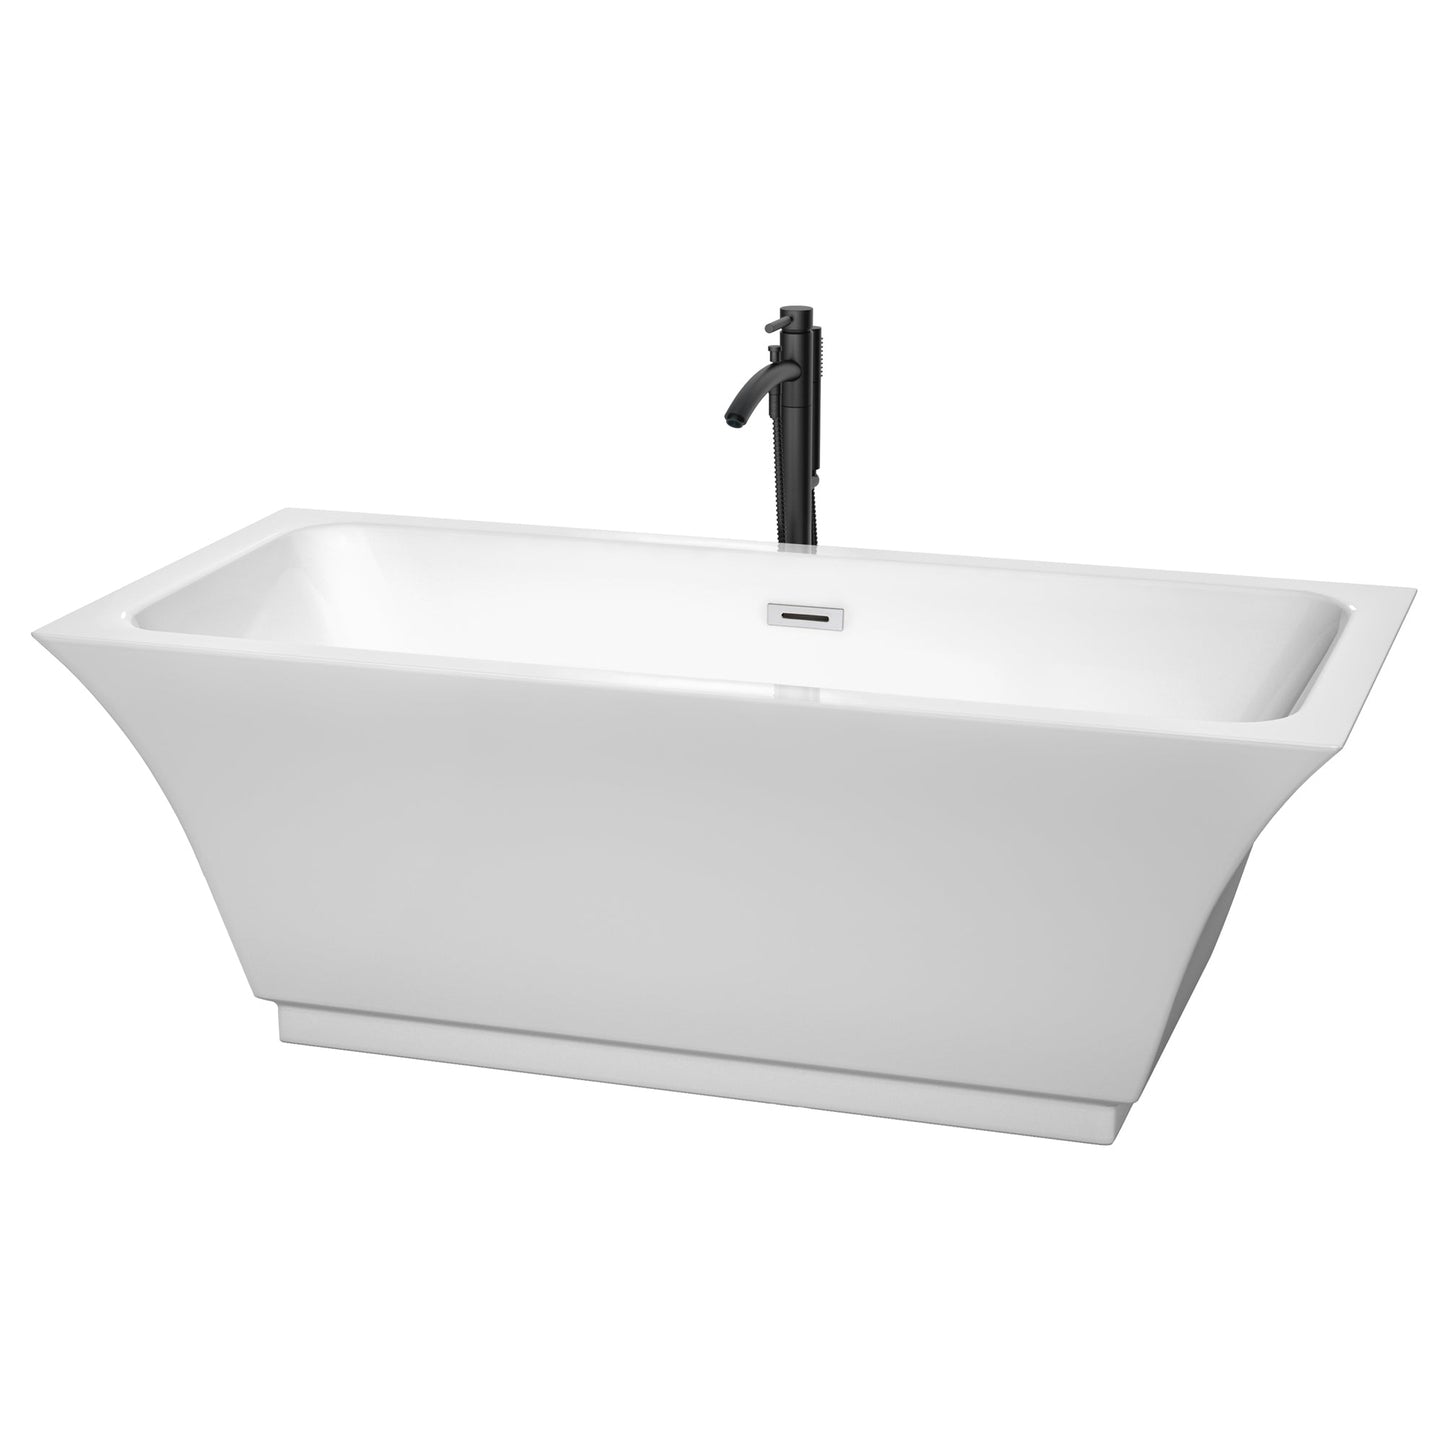 Wyndham Collection Galina 67" Freestanding Bathtub in White With Polished Chrome Trim and Floor Mounted Faucet in Matte Black